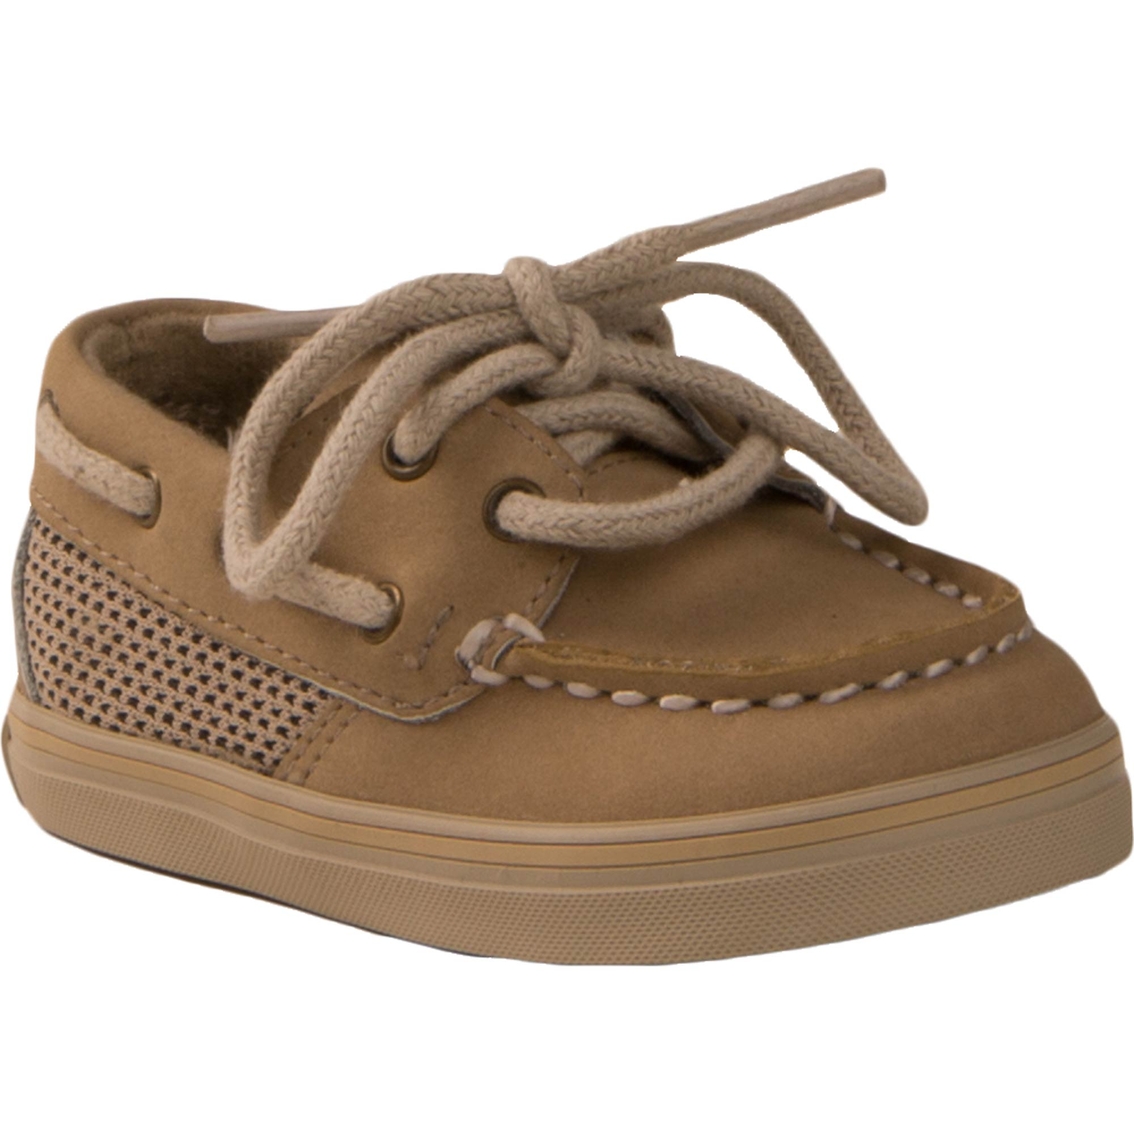 sperry baby shoes